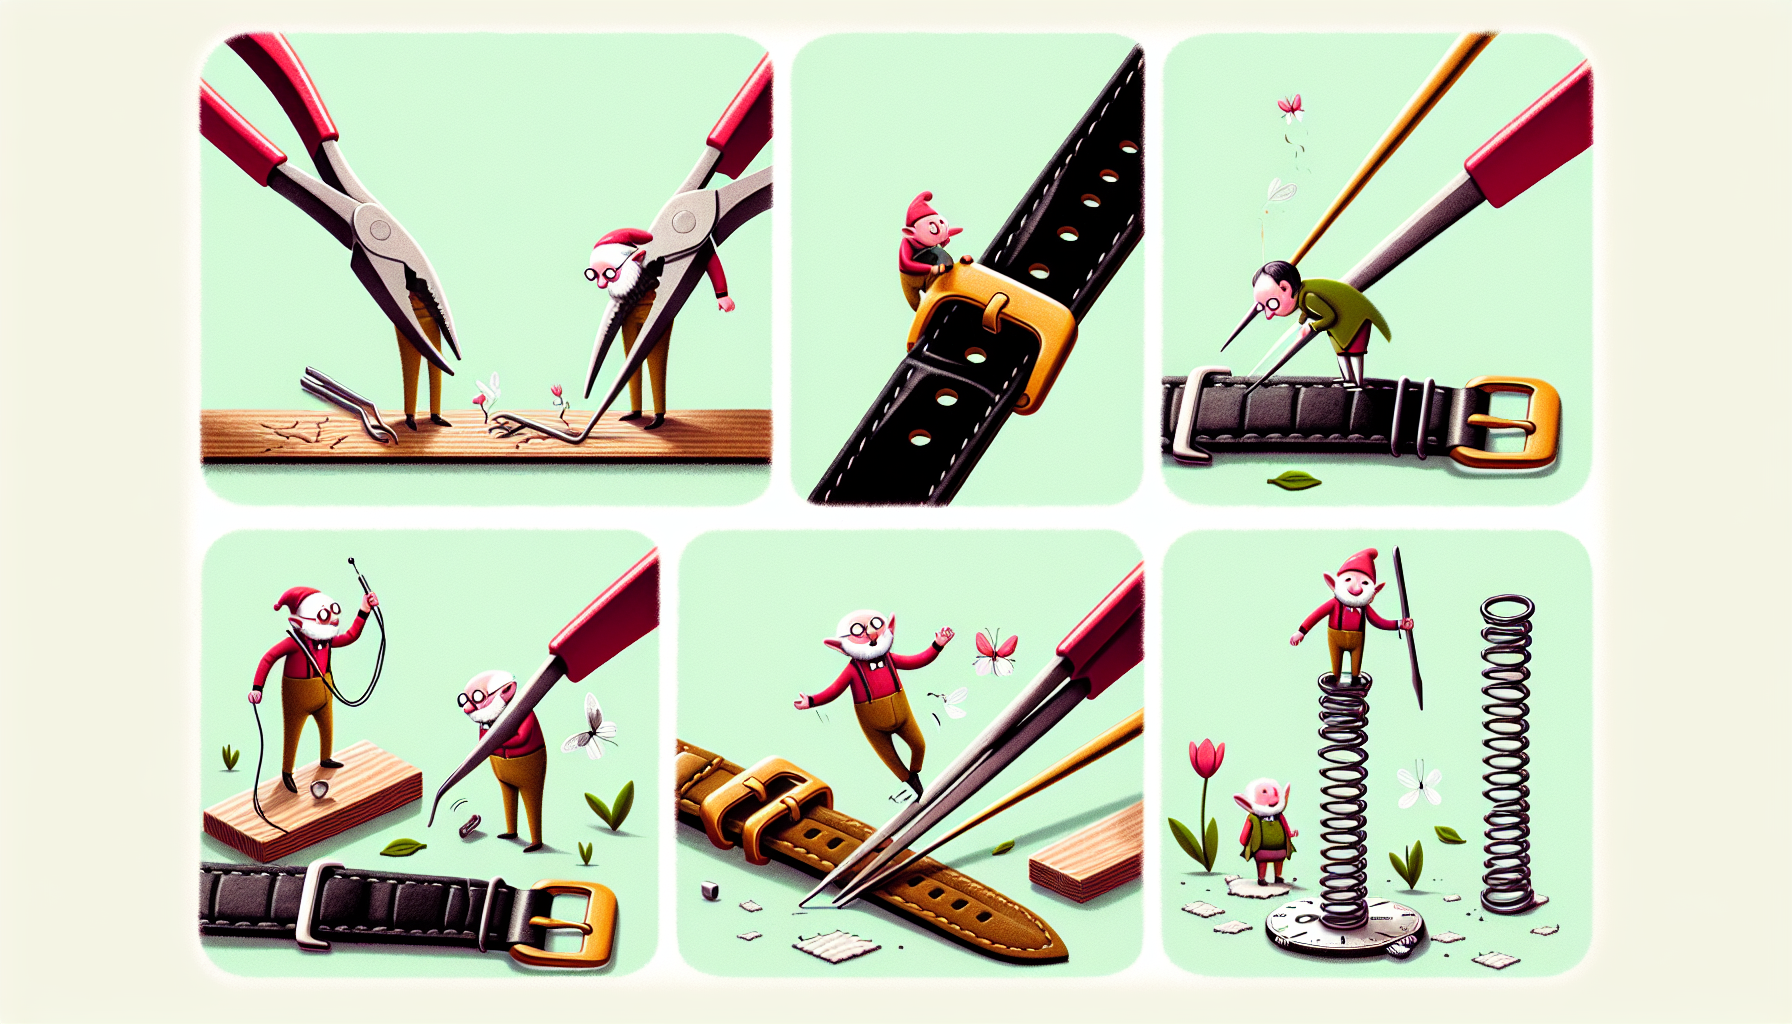 Whimsical illustration of replacing watch straps with spring bars